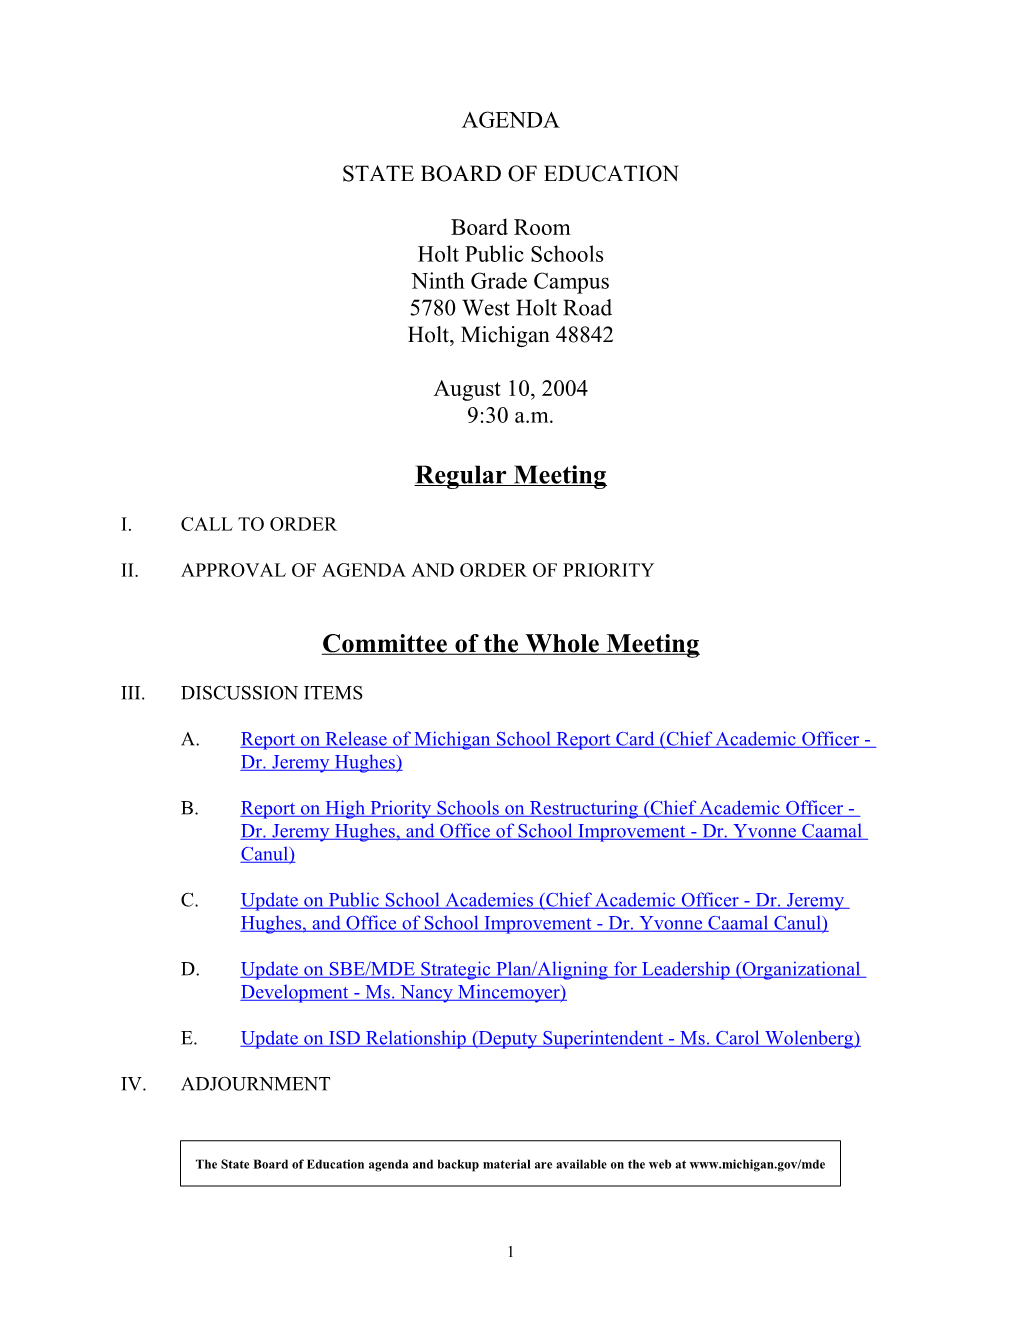 State Board of Education s5